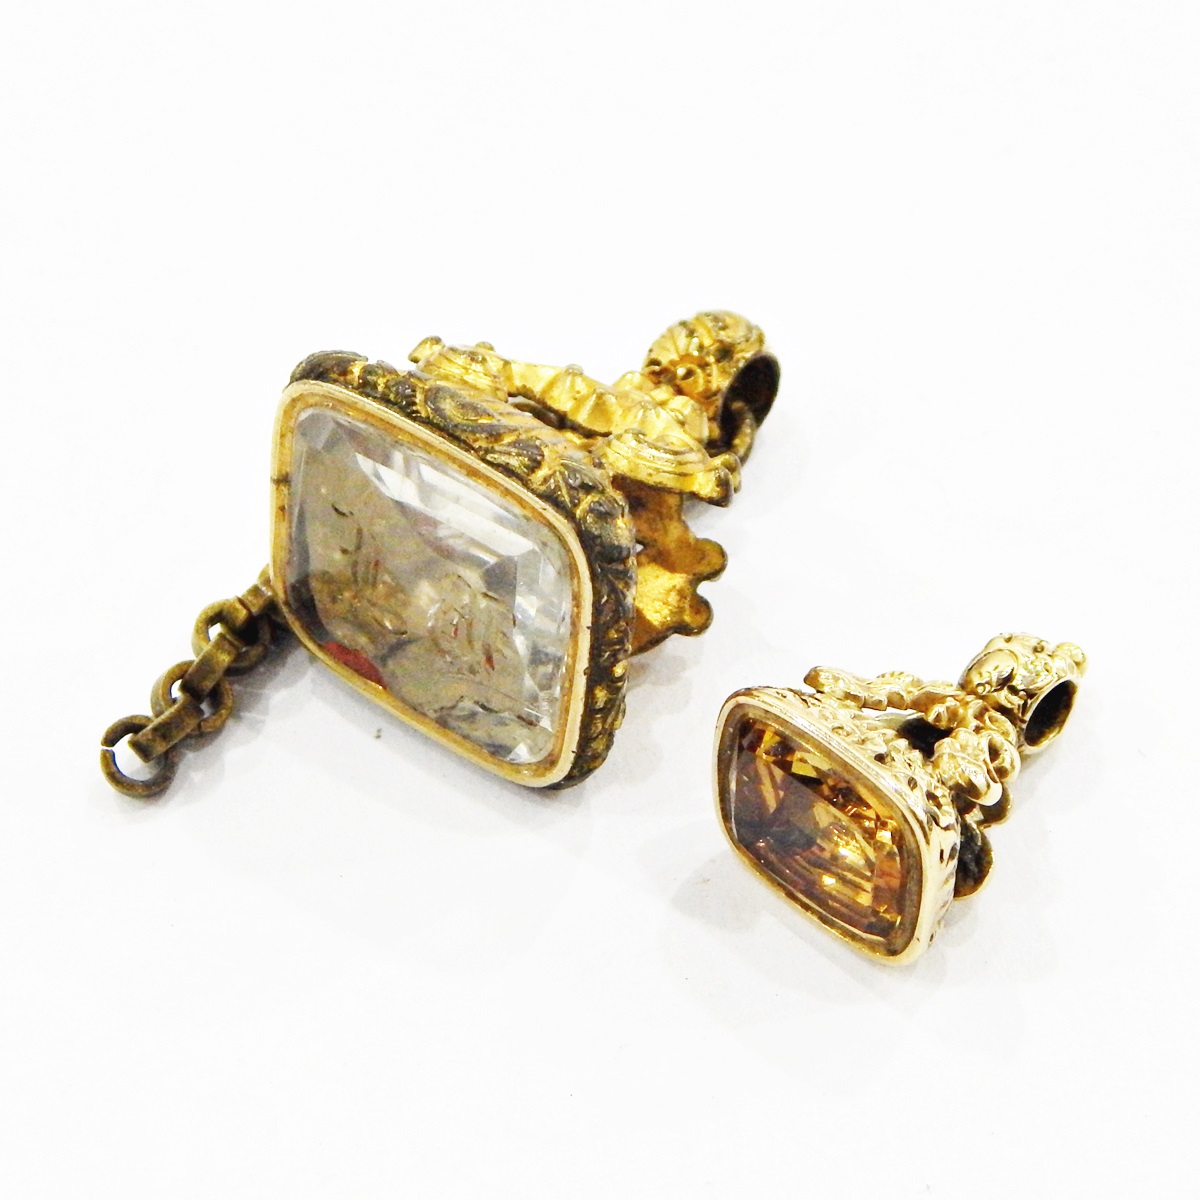 19th century gold-coloured metal seal set with citrine,